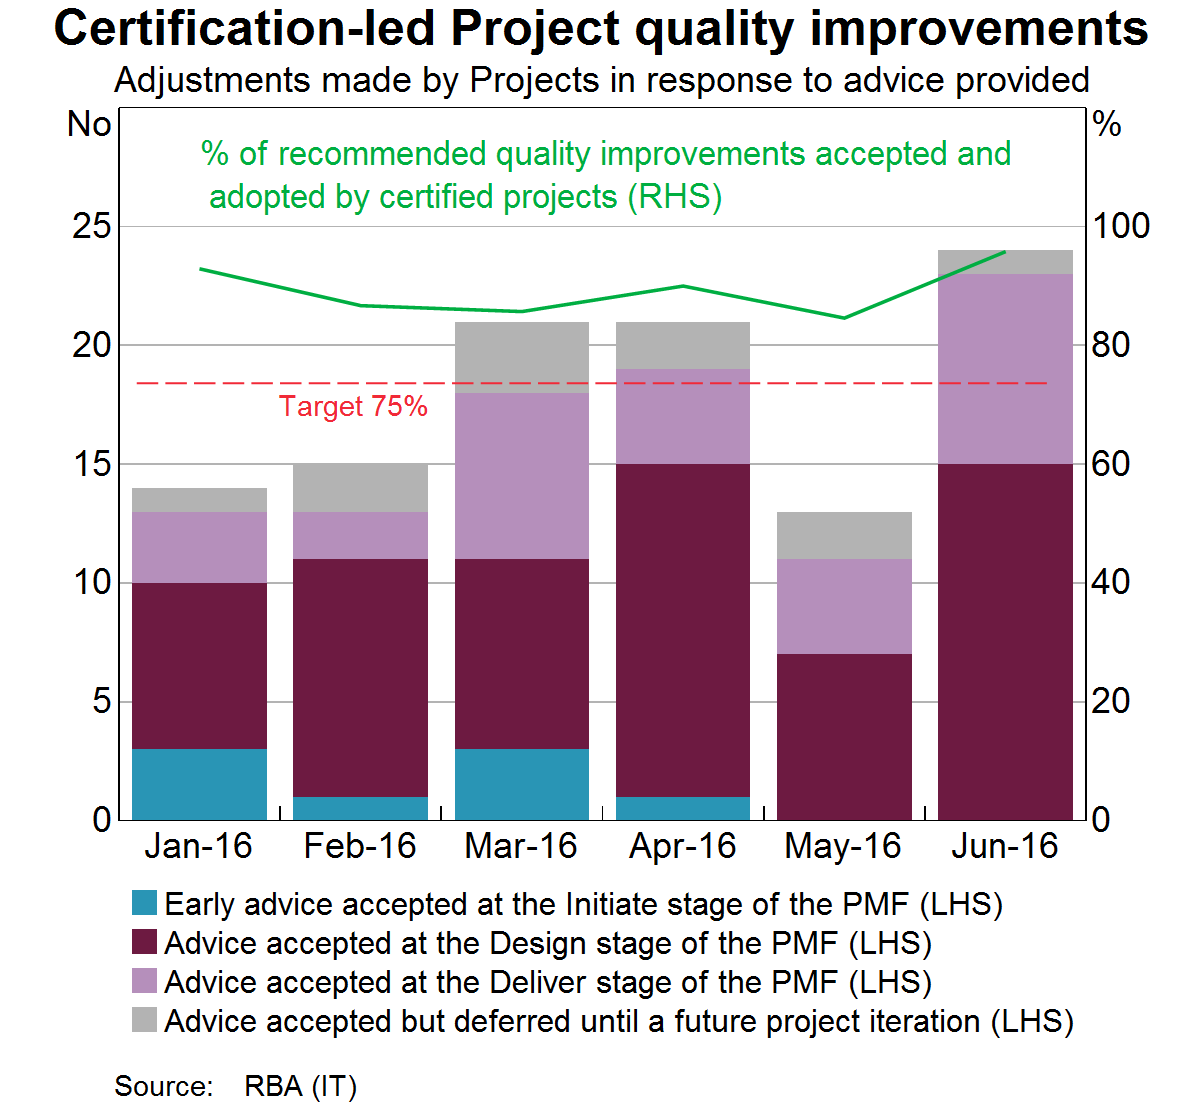 Graph 3: Certification-led Project quality improvements